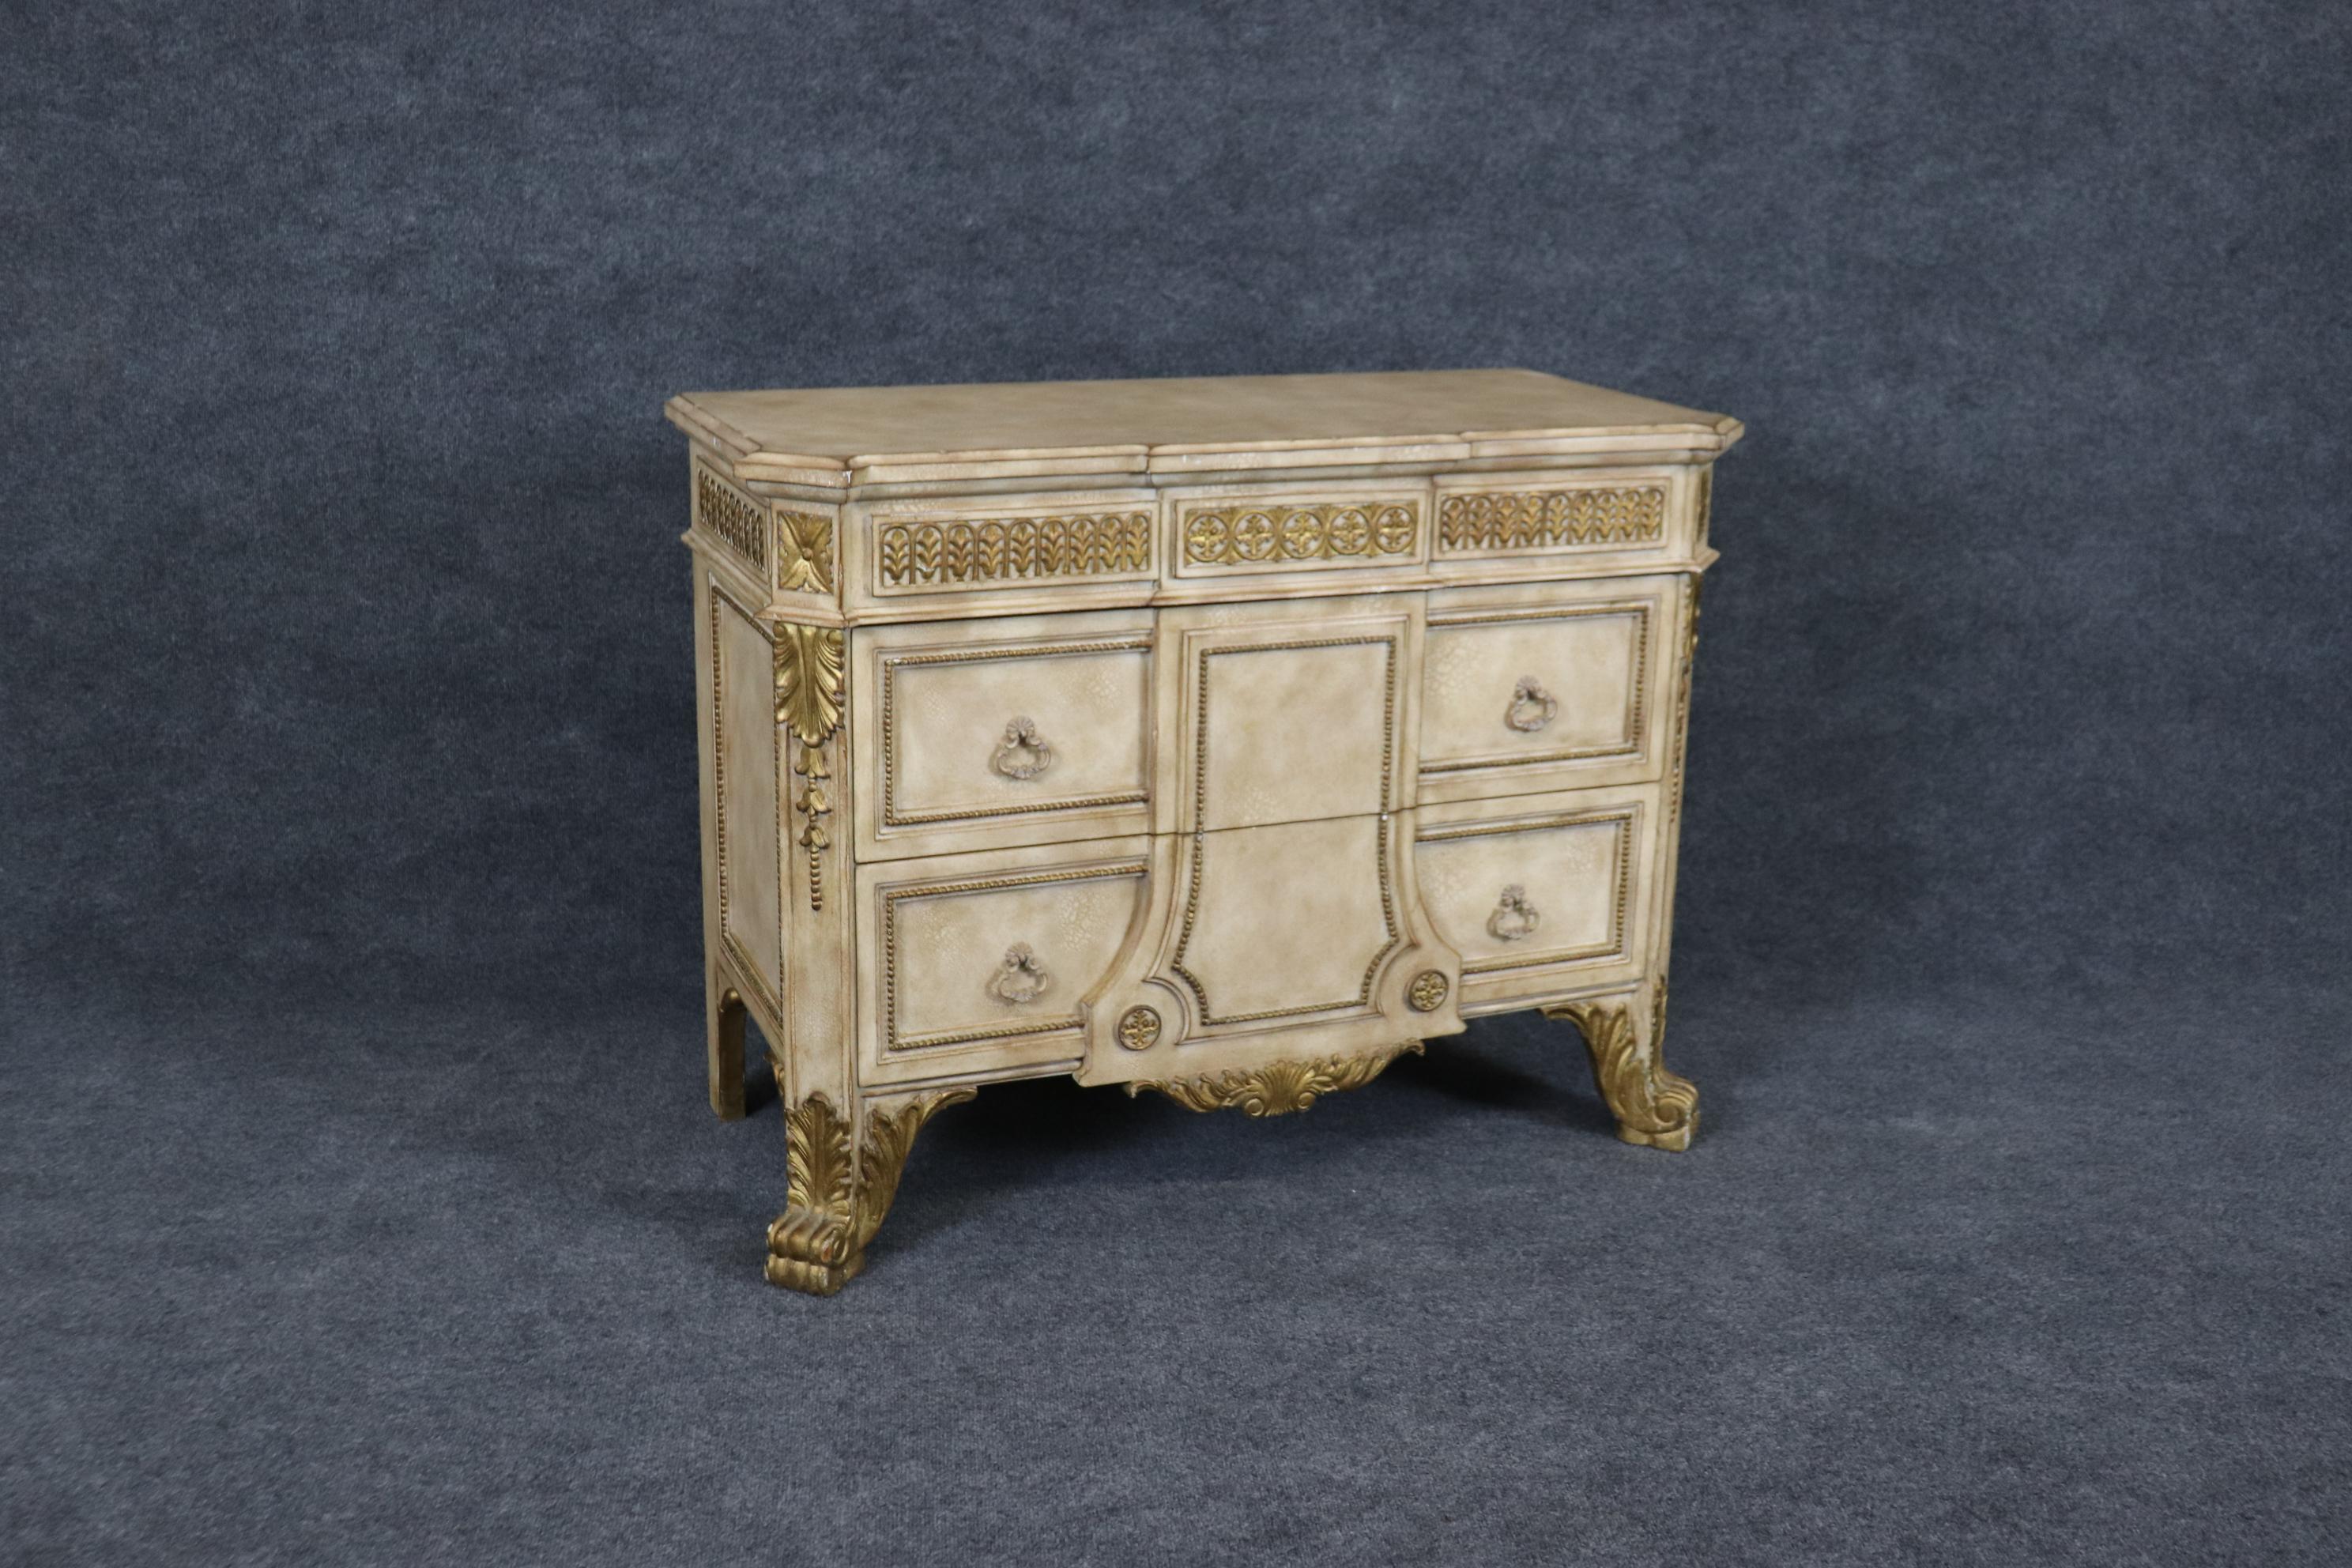 This is a beautiful commode done in the renaissance style with a paint decorated and gilded with metal hardware. The color palette is soft and muted and this will work in many design environments. Measures 44.25 wide x 20 deep x 33 tall. Dates to